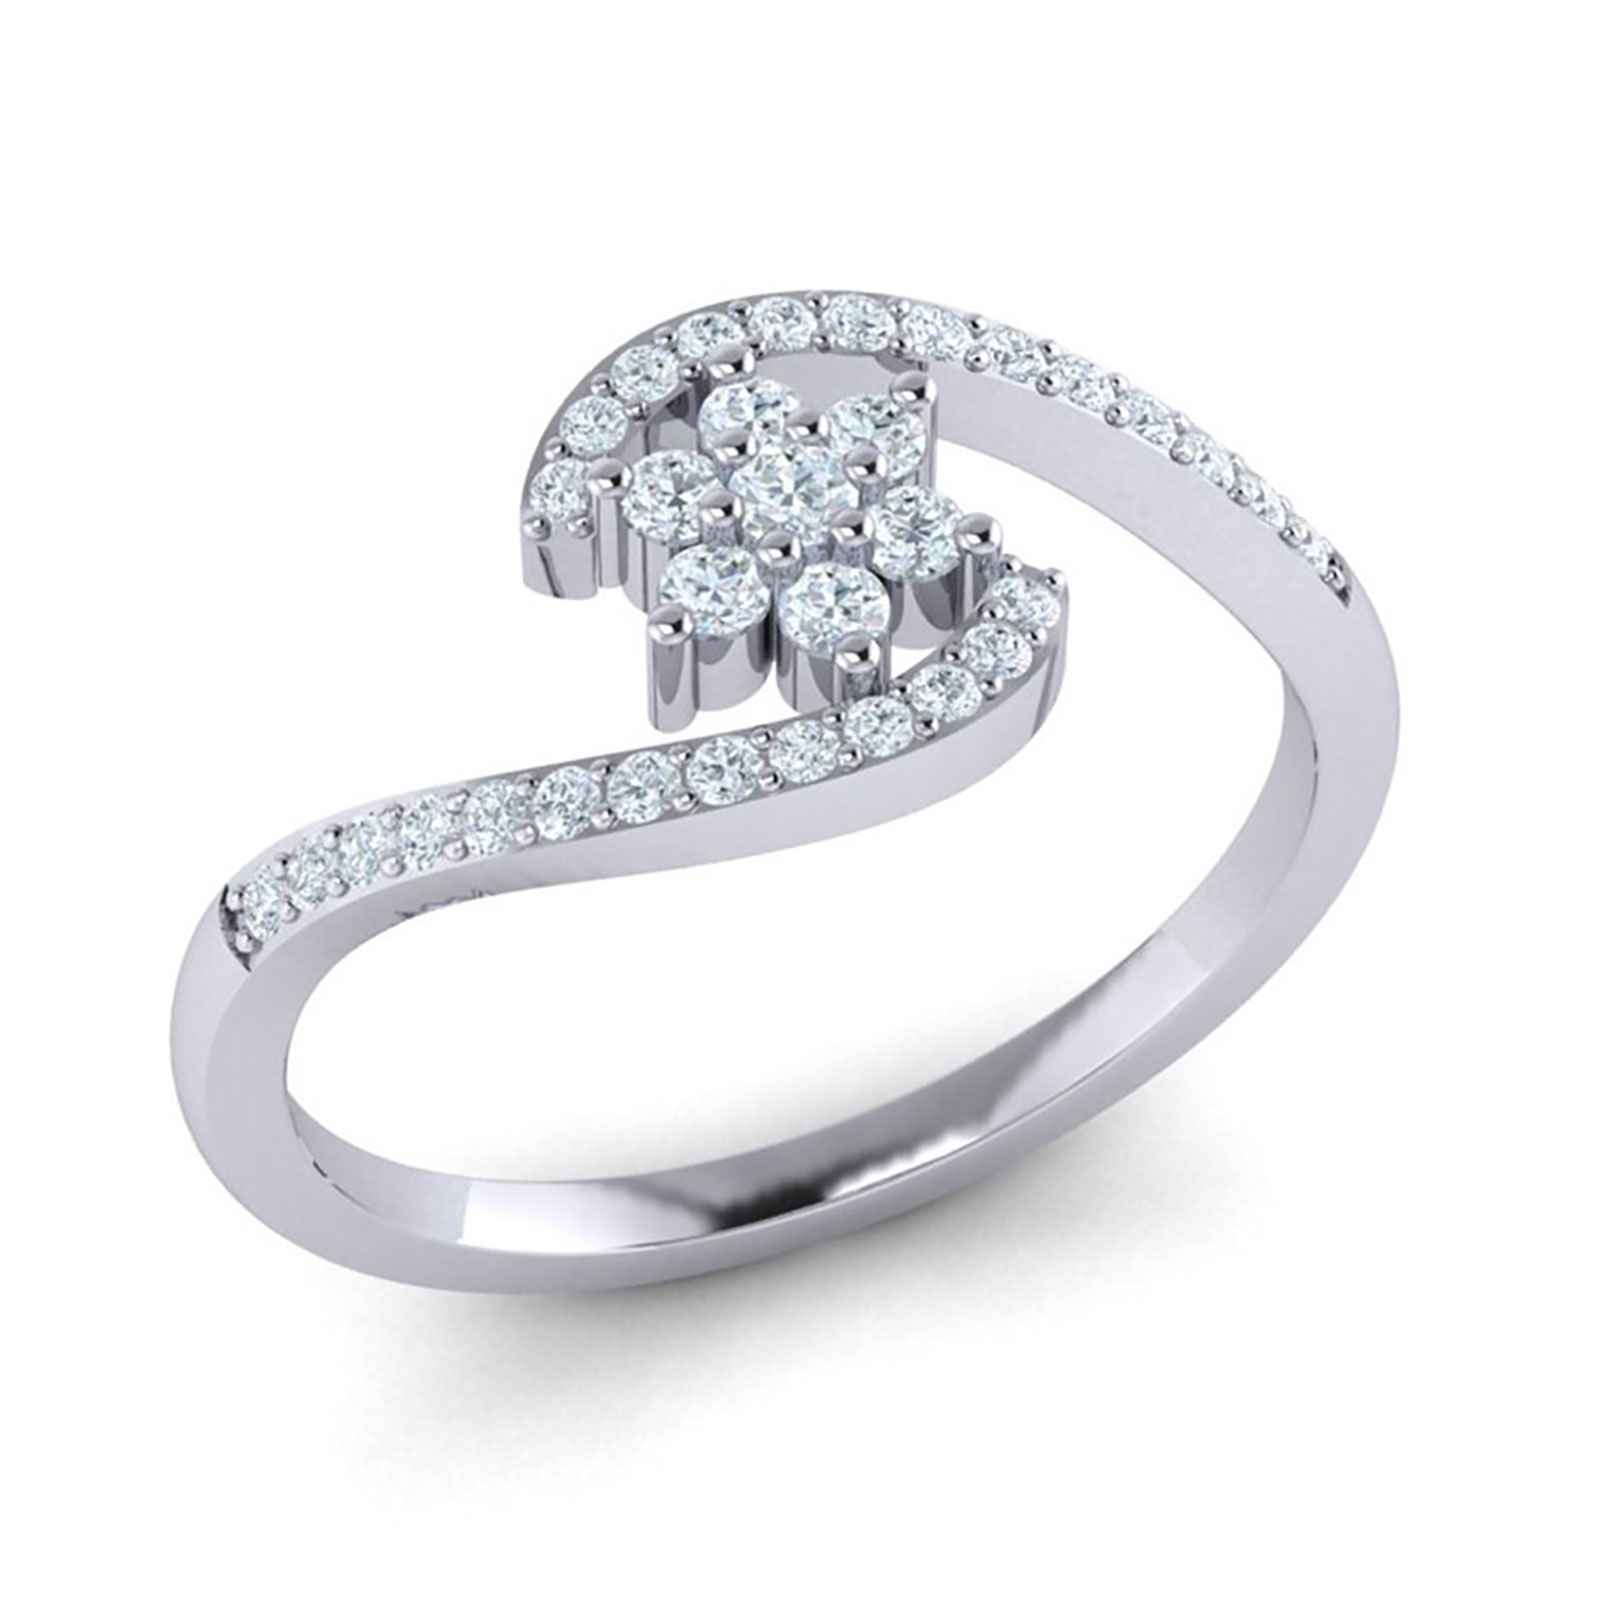 Jewel We Sell Natural 0.75ct Round Cut Diamond Fancy Ladies Engagement Bridal Ring Anniversary 14K White Gold